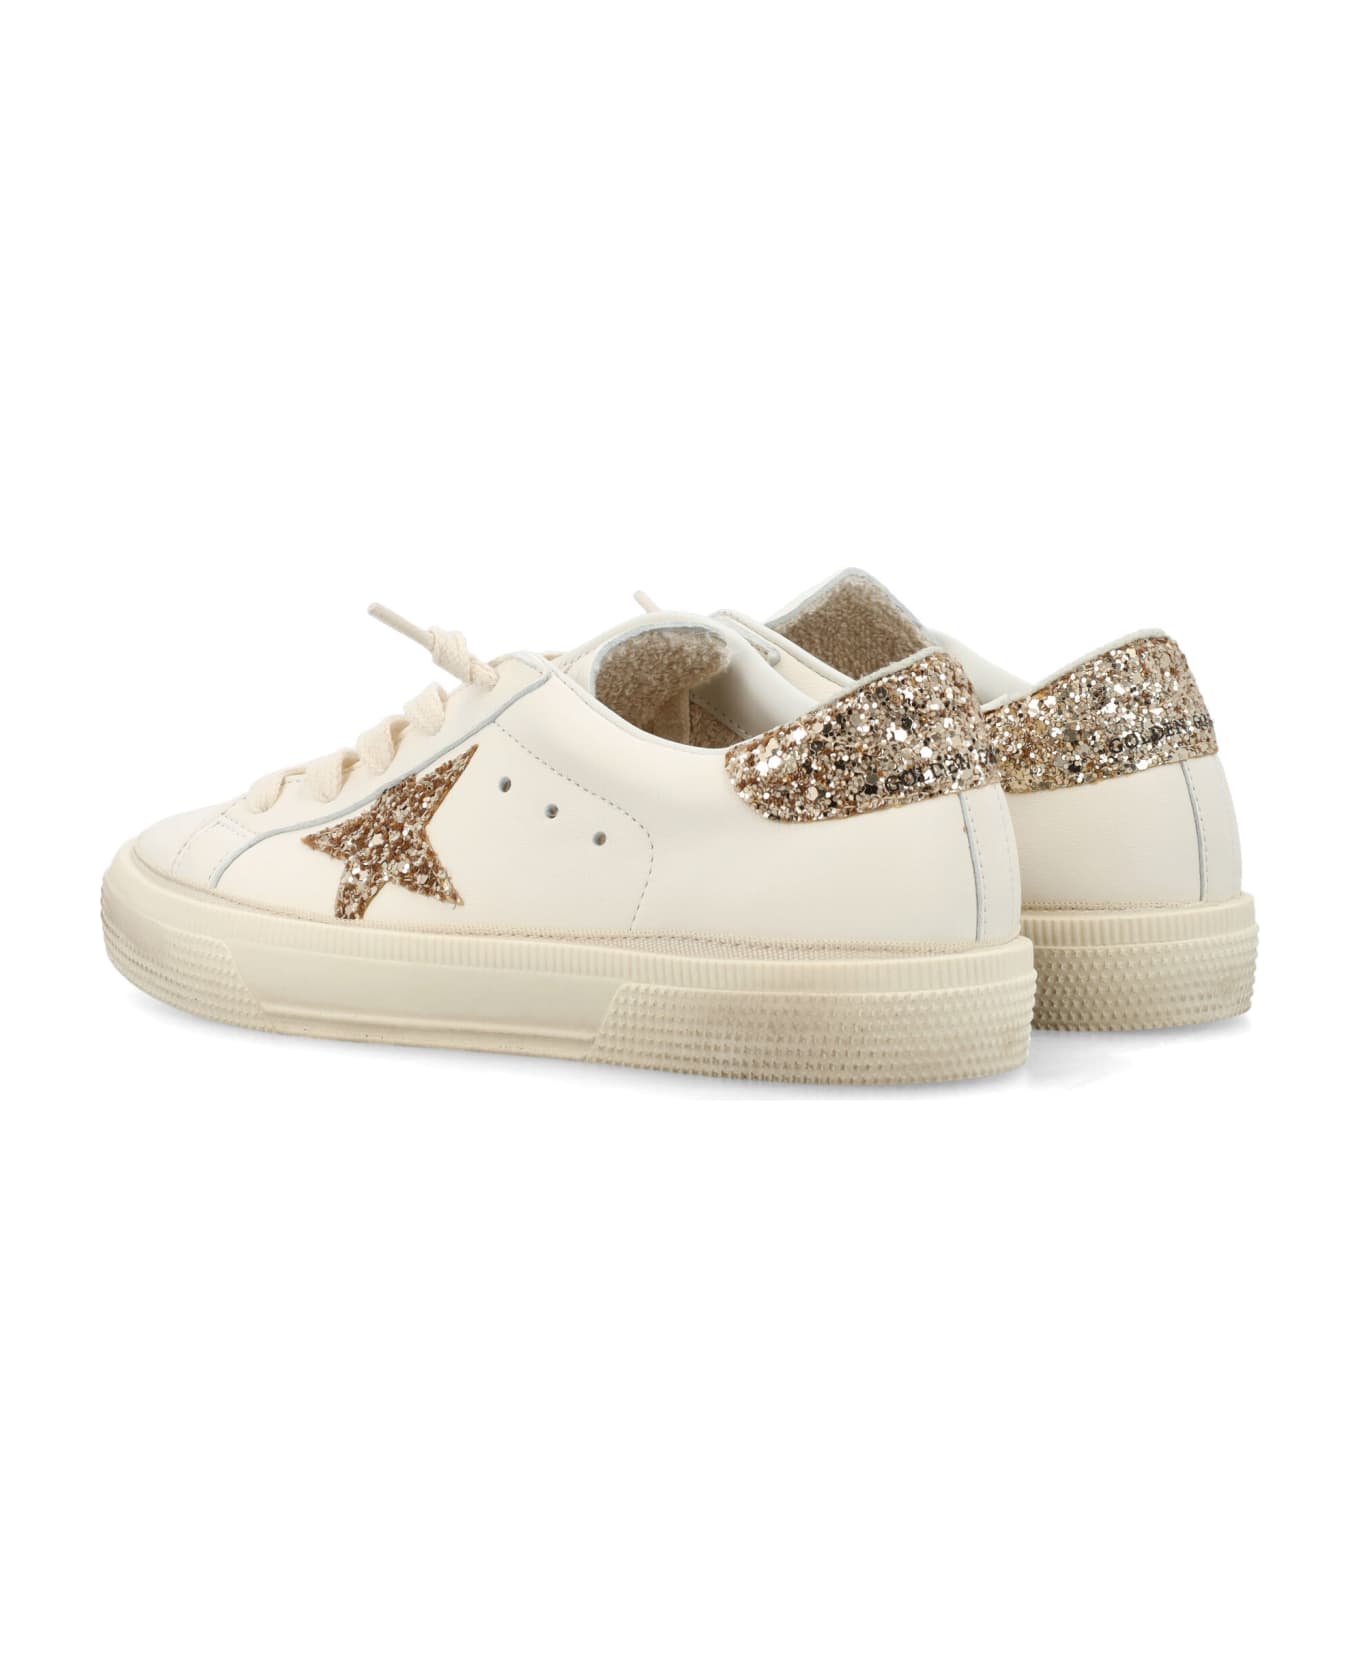 Golden Goose May Sneakers - WHITE/GOLD シューズ